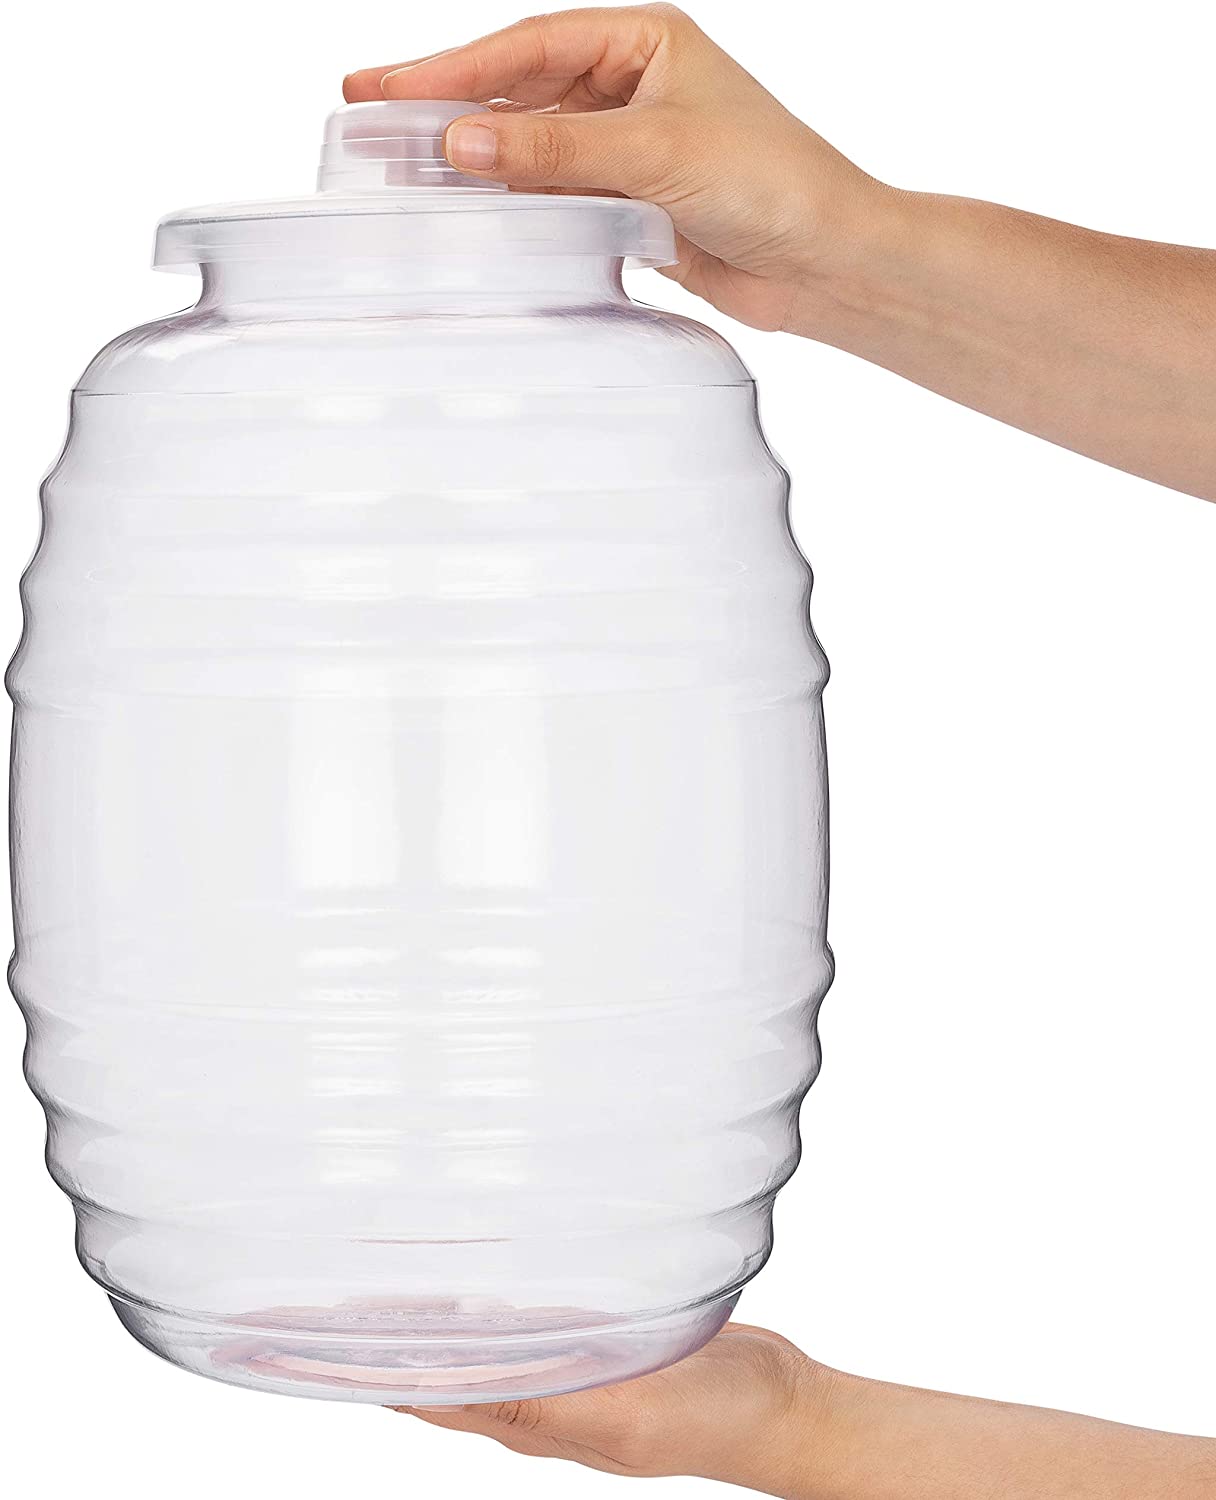 Champs 5 Gallon Jug with Lid and Spout - Aguas Frescas Vitrolero Plastic Water Container - 5 Gallon Drink Dispenser - Large Beve